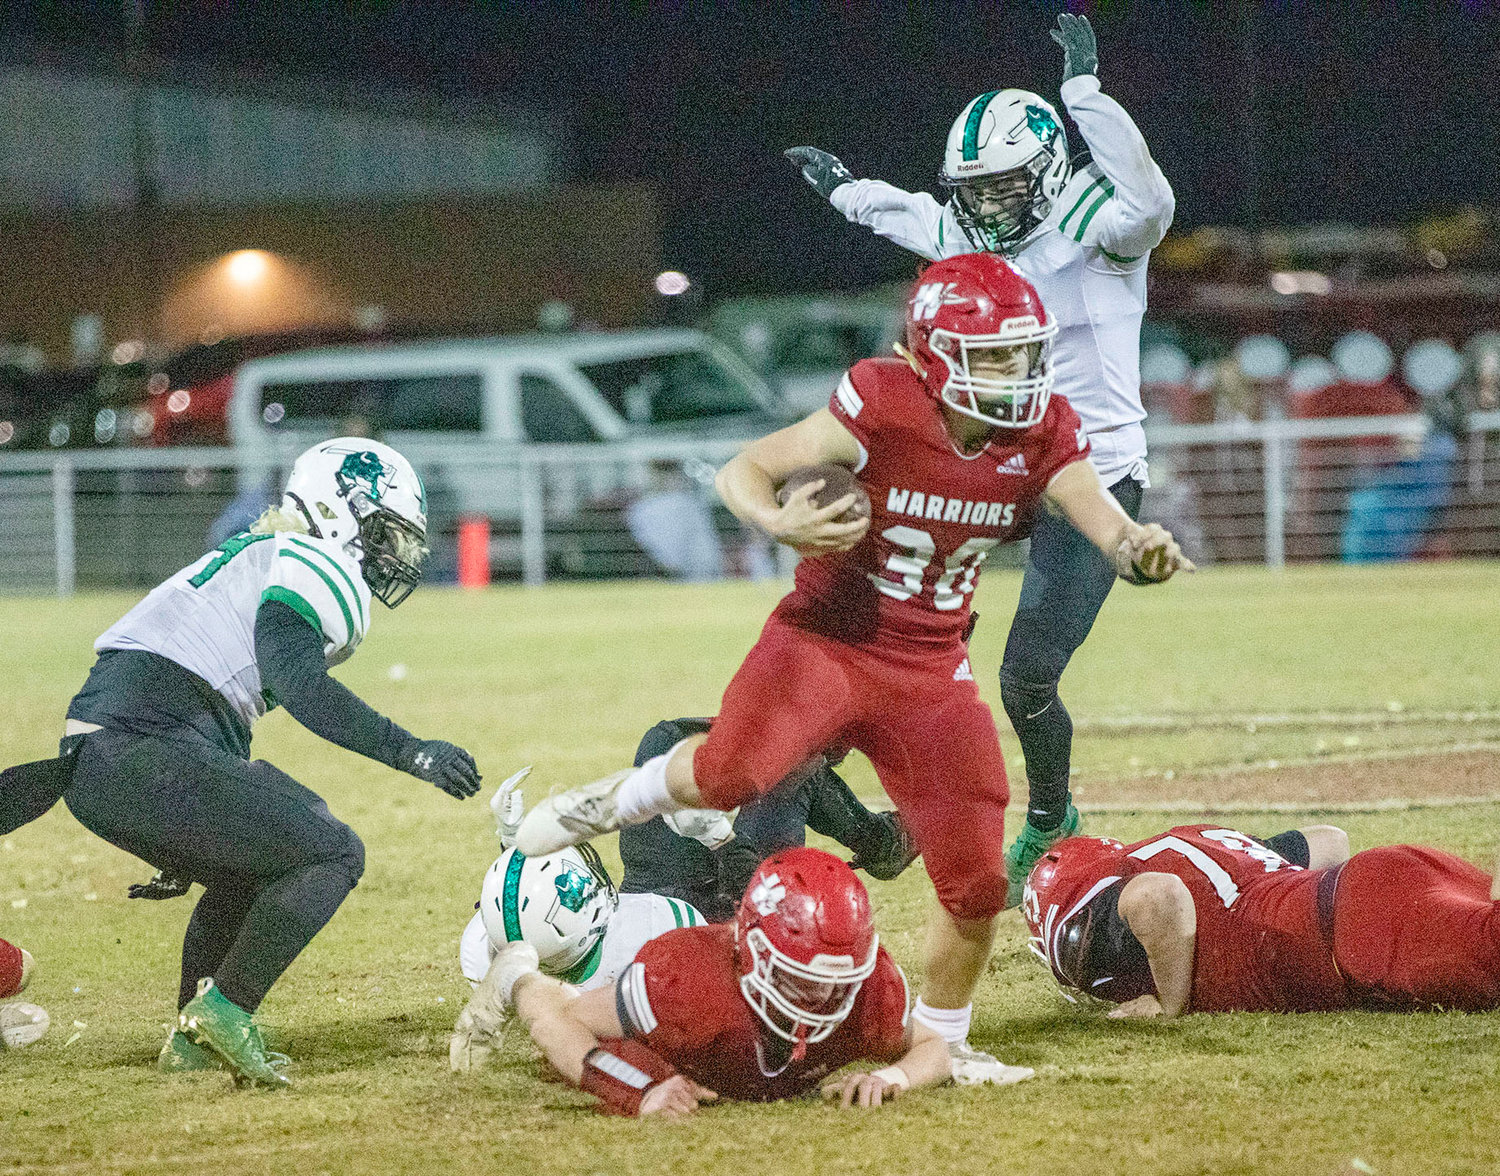 Washington sophomore Kade Norman rumbles over the line of scrimmage during the Warriors’ 52-21 win over Jones Friday night. Washington travels to Owasso to face Rejoice Christian in the quarterfinals of the State playoffs this Friday. Norman scored four touchdowns in the game.